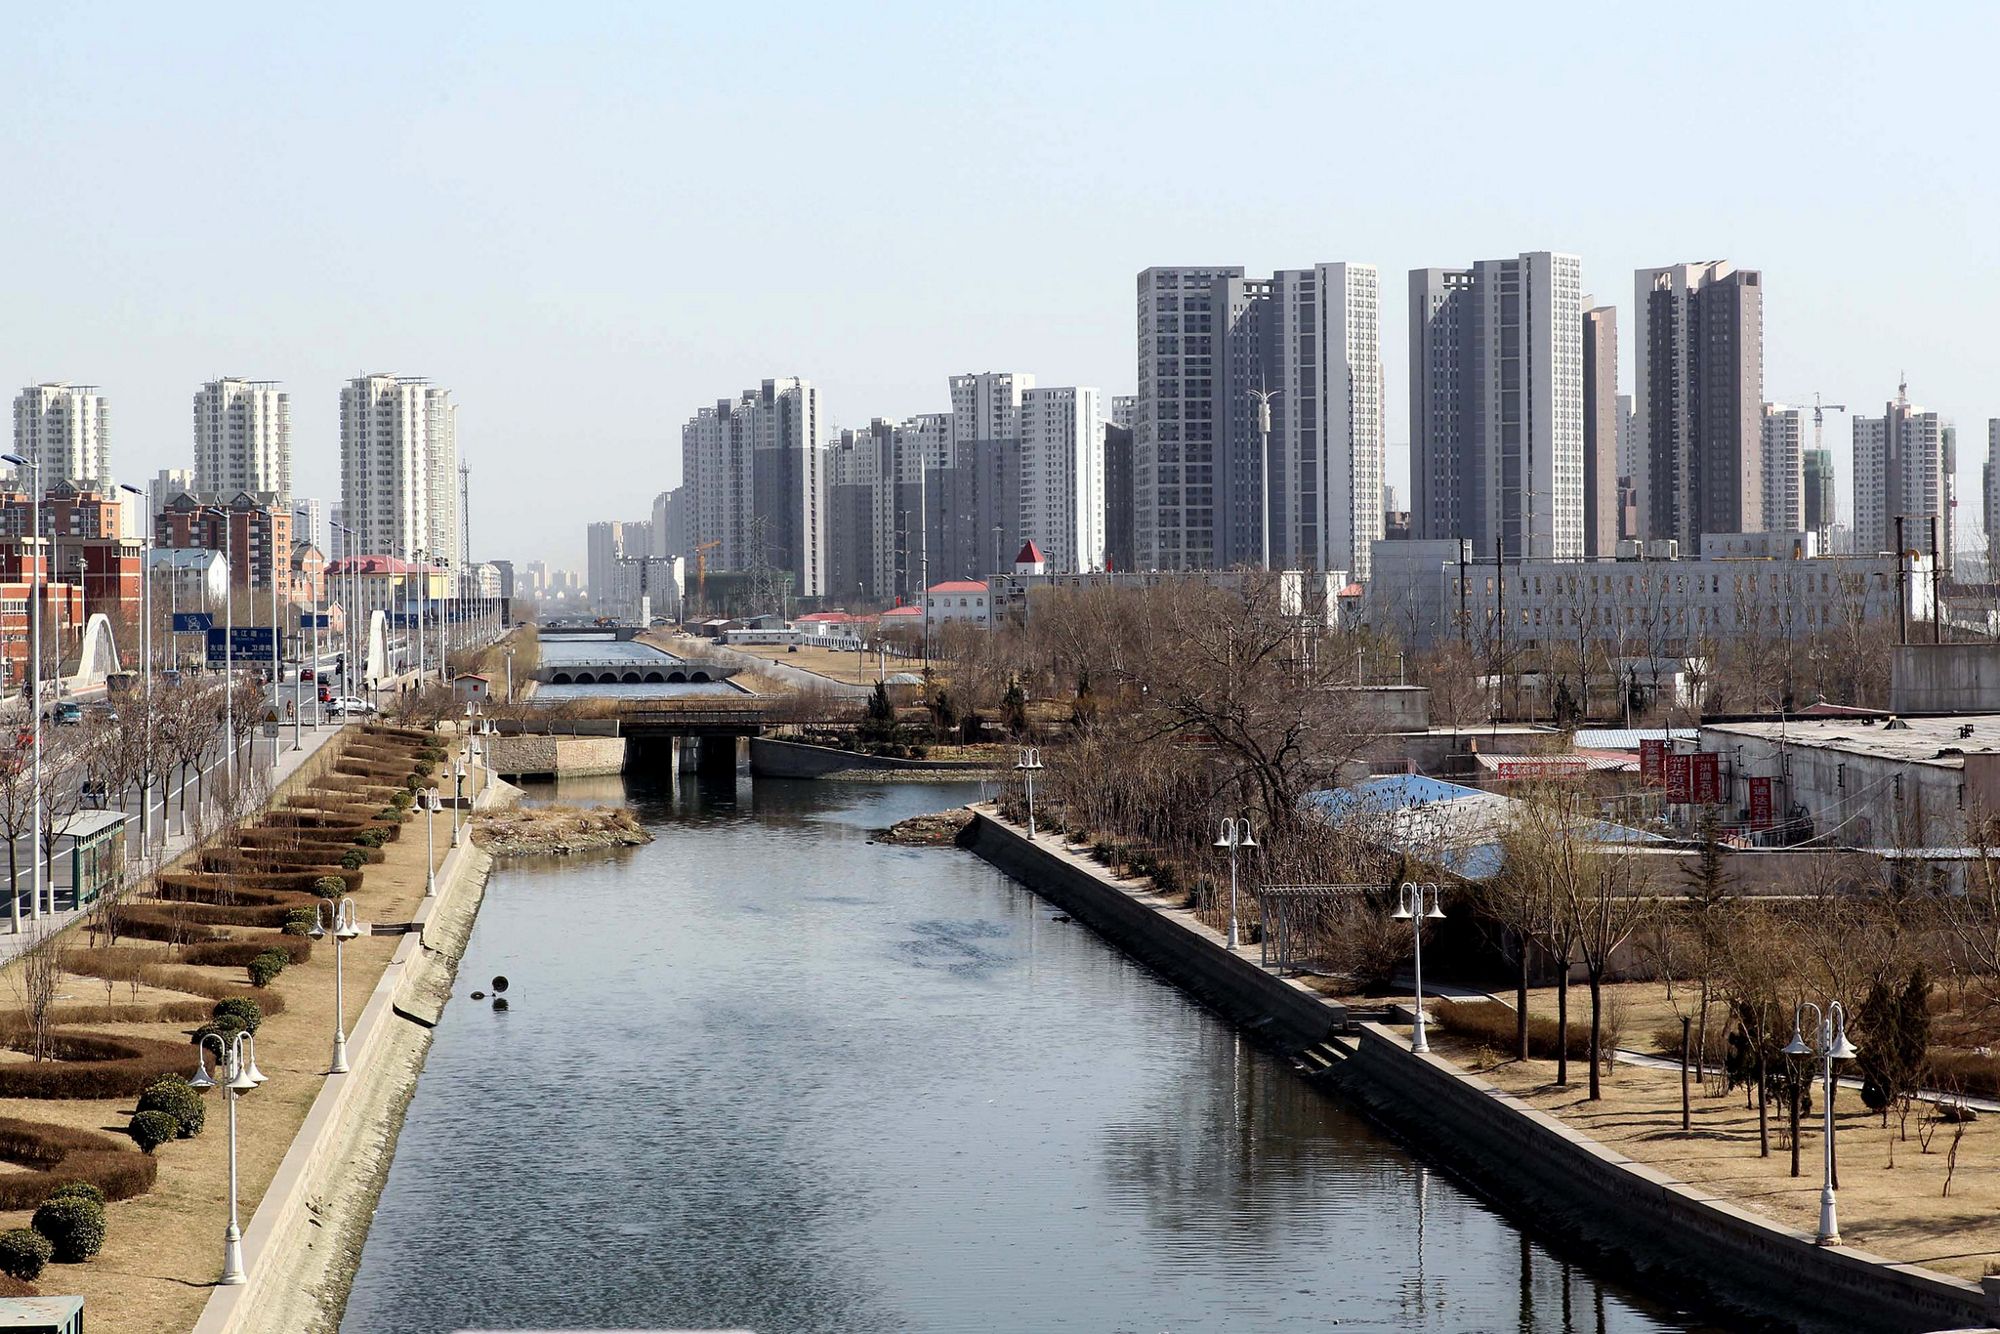 Hai River and high rise buildings around, Tianjin